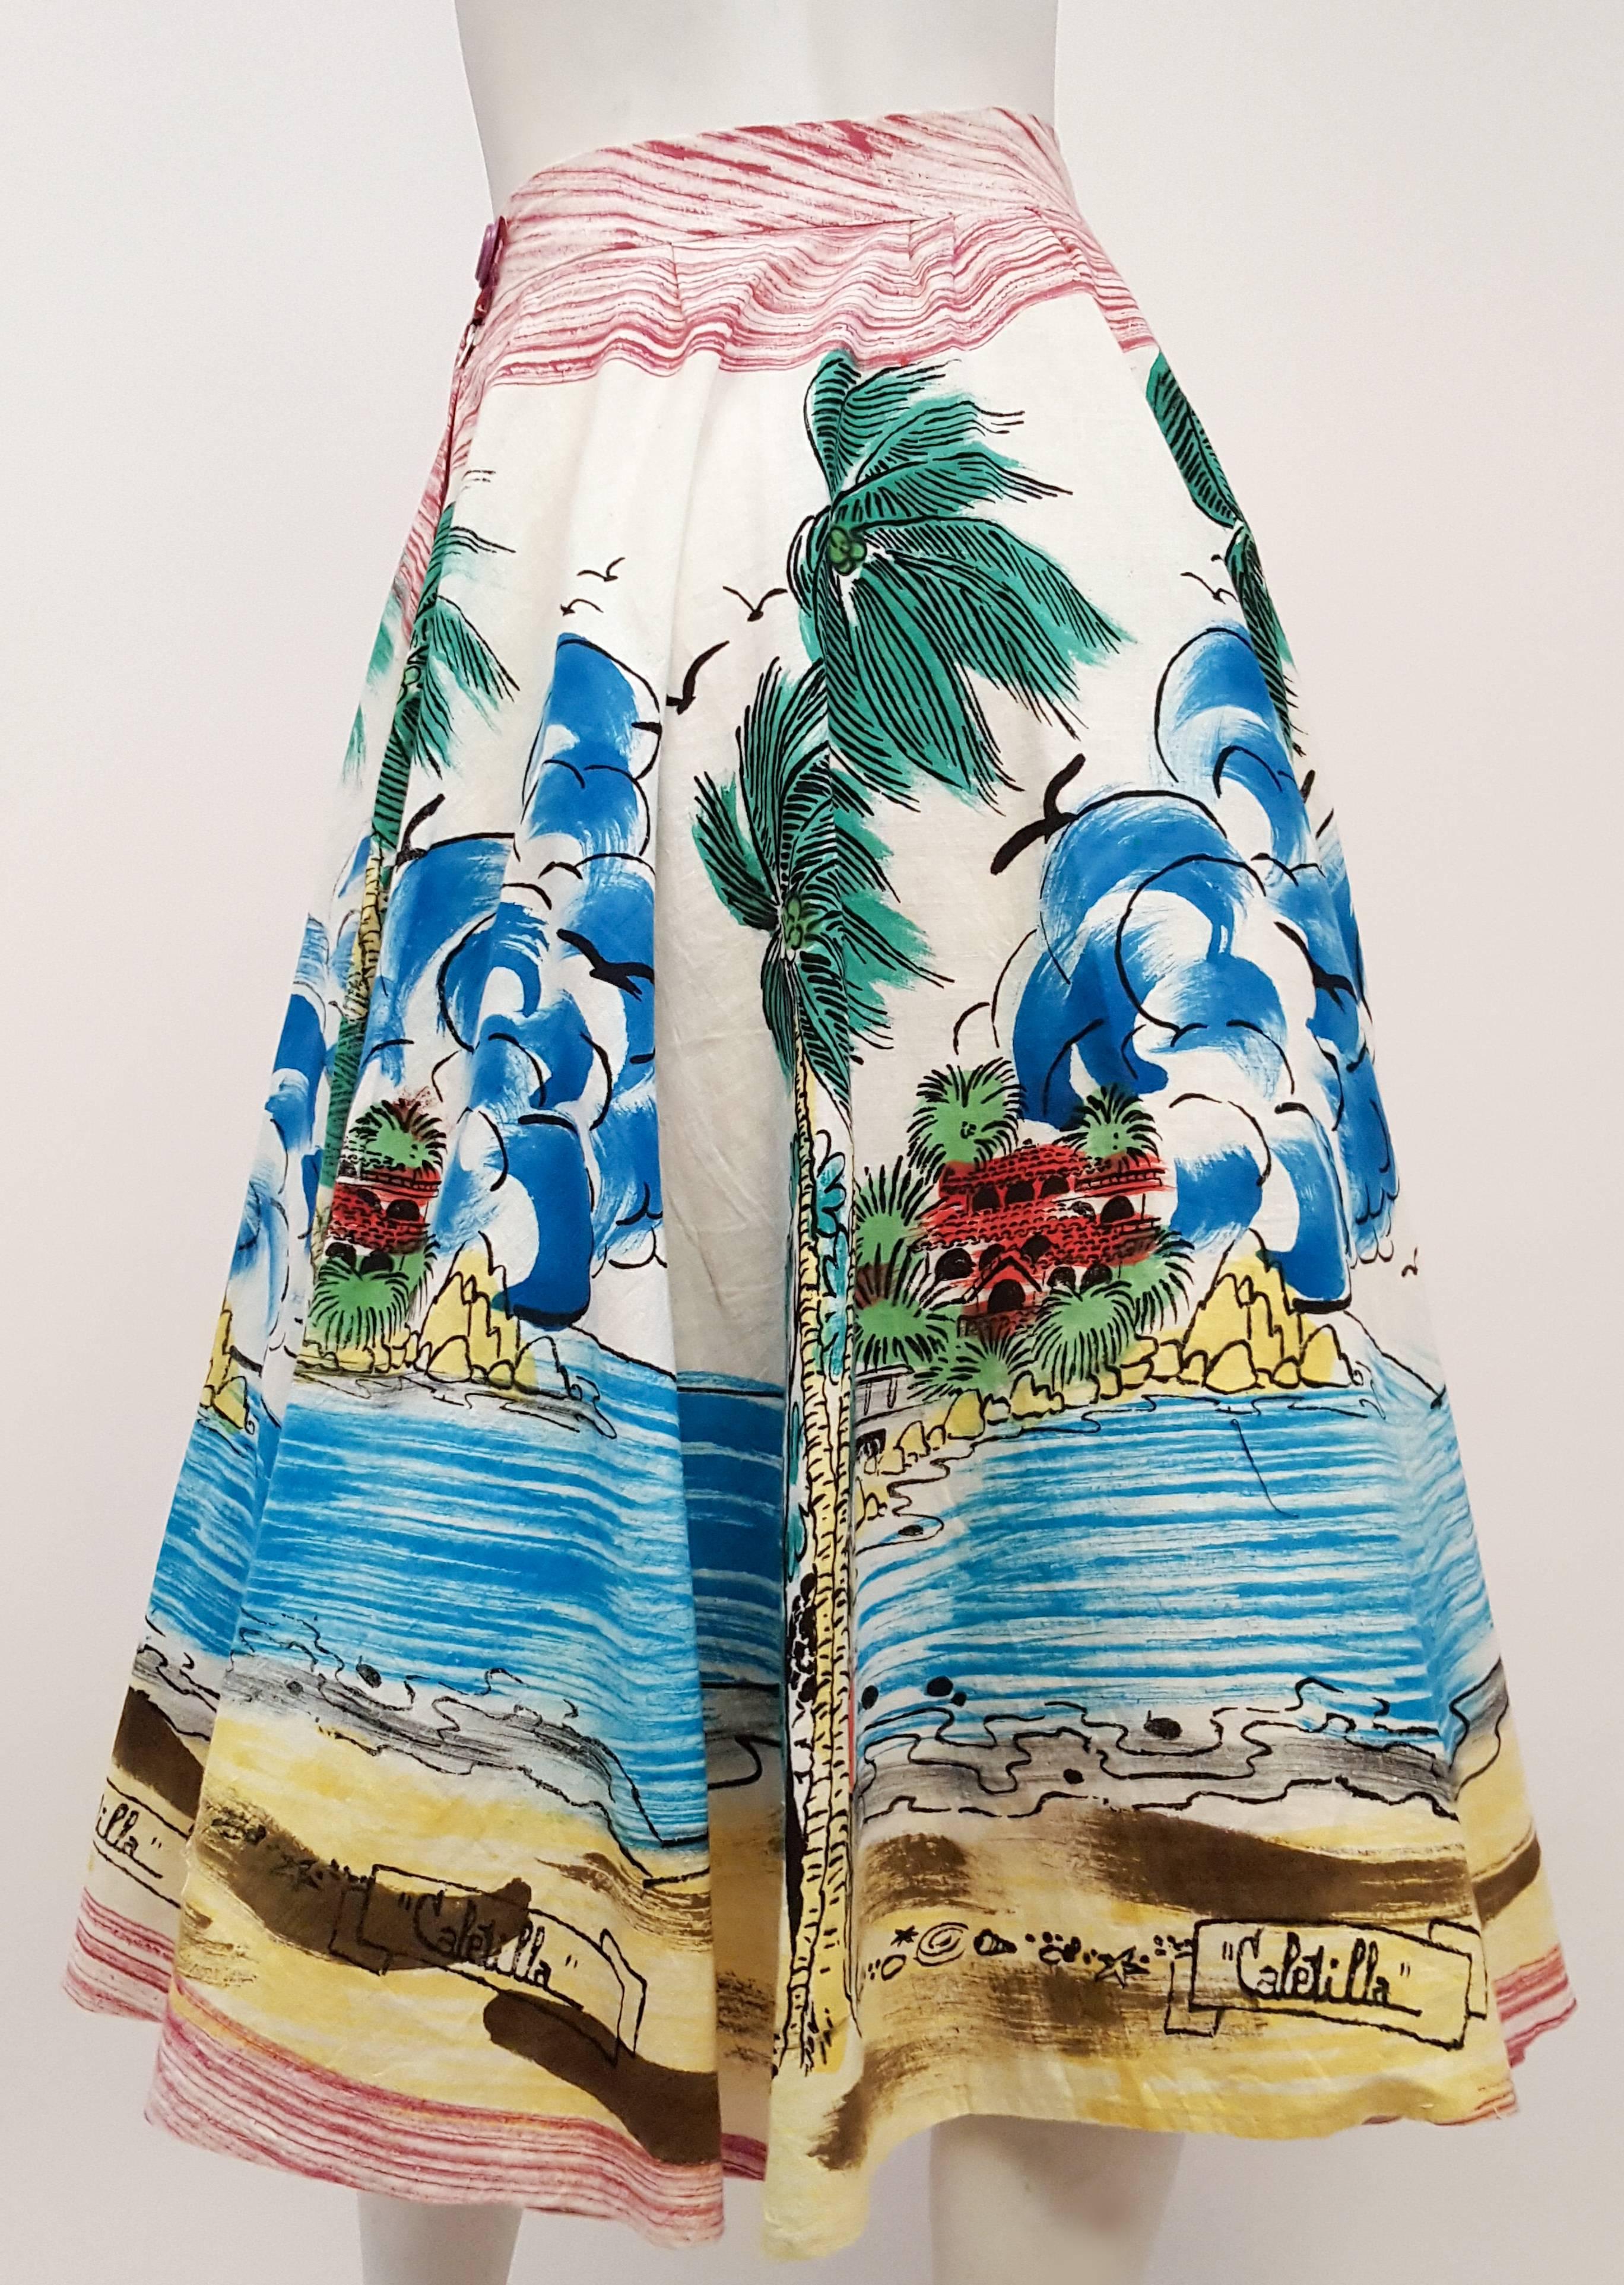 1950s Hand Painted Mexican Souvenir Skirt. Metal side zipper and button closure. 